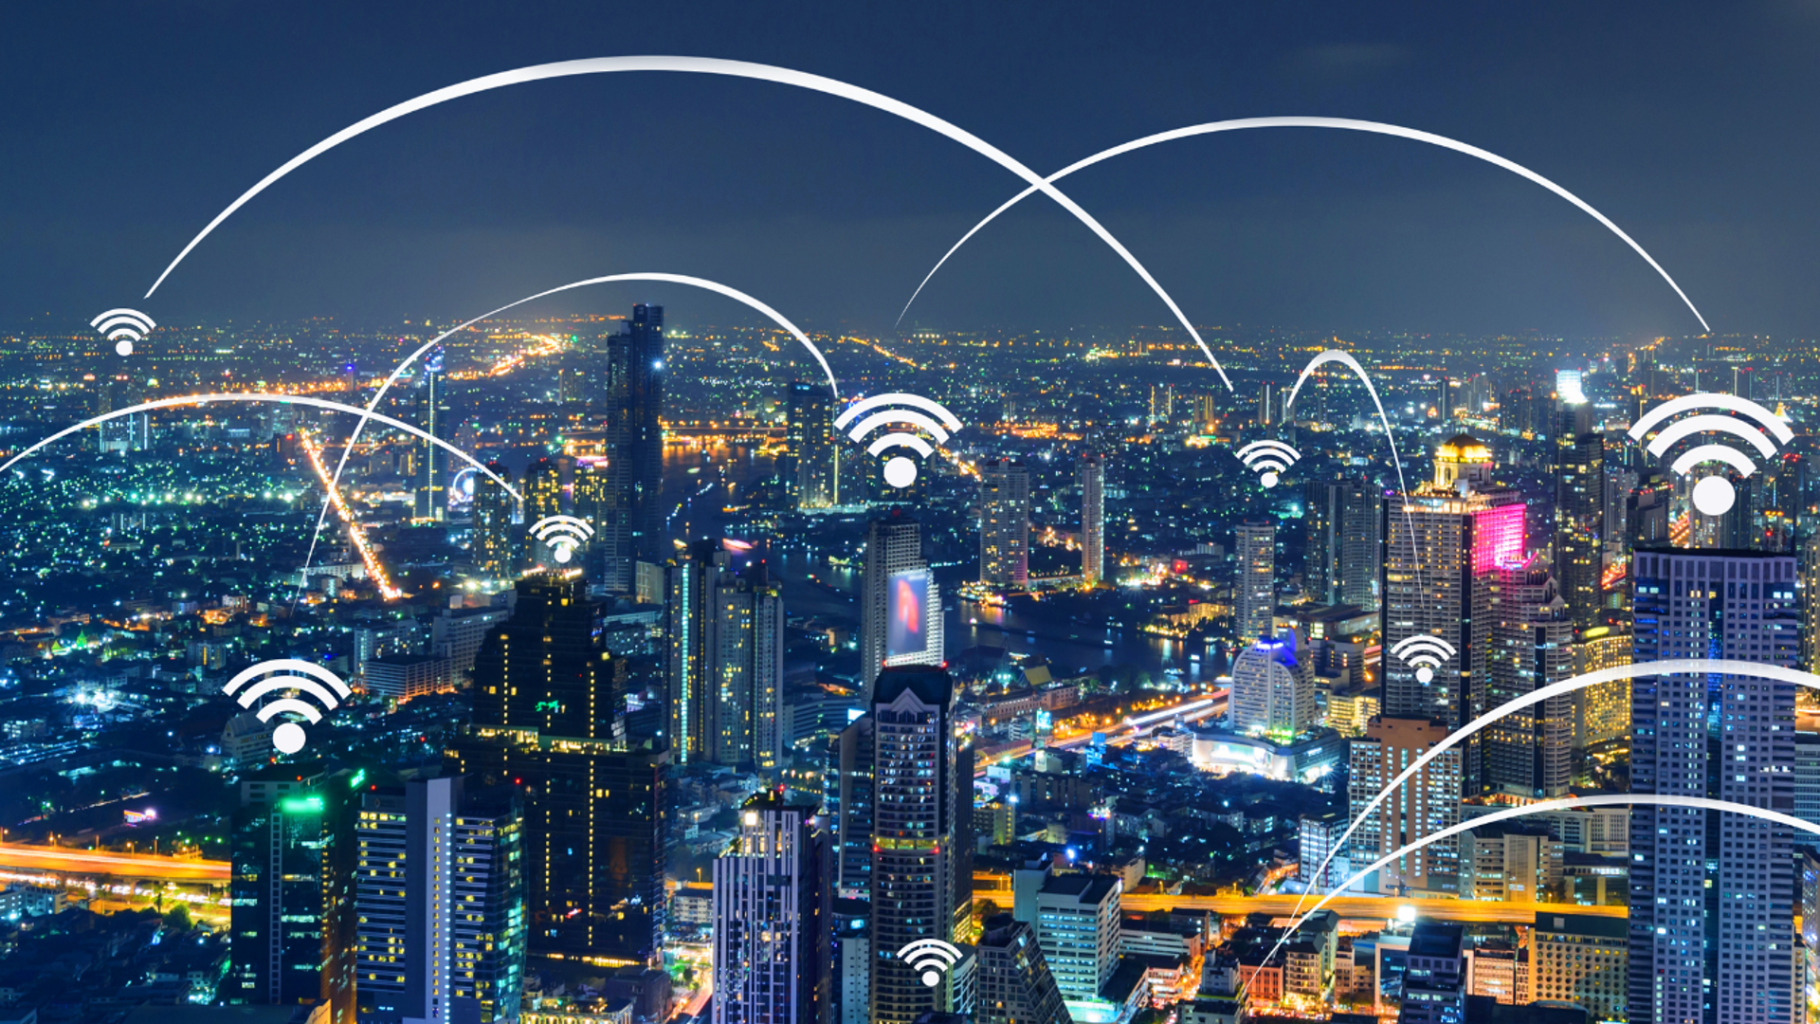 Embedded WiFi modules are becoming increasingly popular as they offer a cost-effective solution to integrating WiFi into a device.